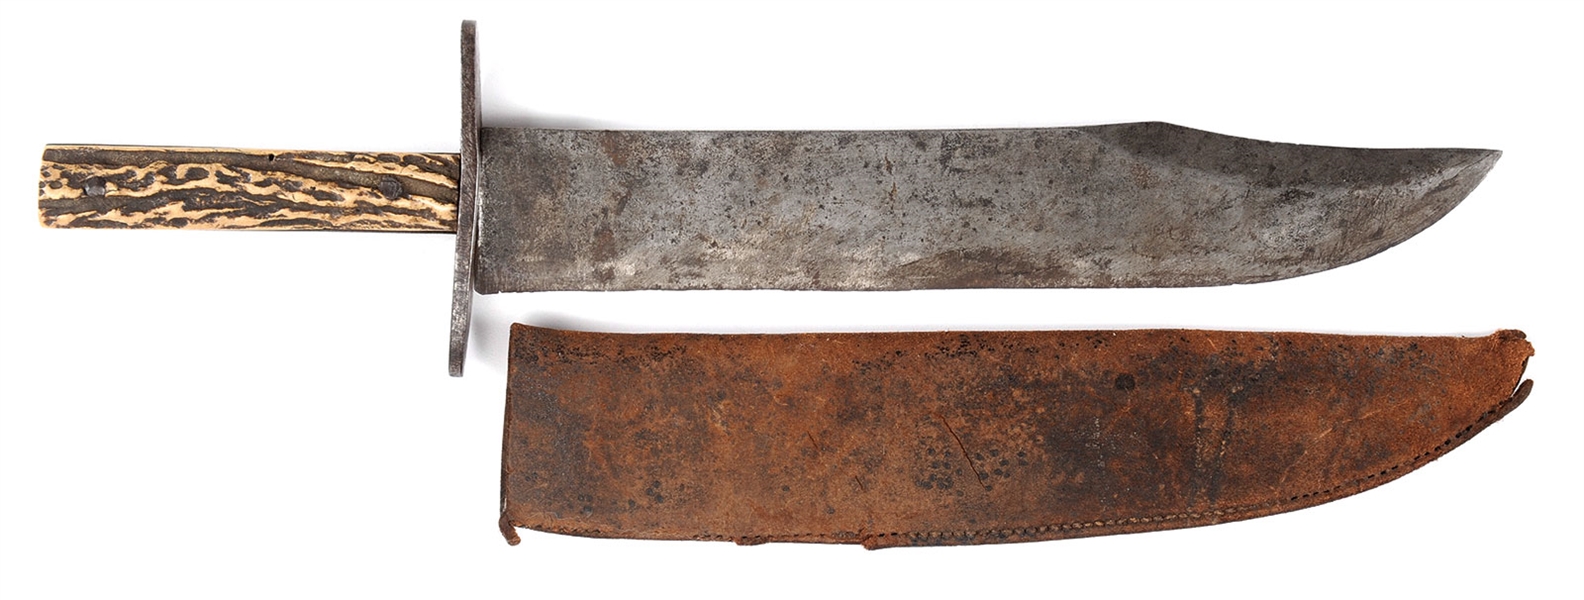 FINE LARGE CONFEDERATE SIDE KNIFE IN ORIGINAL SCABBARD FROM KENTUCKY ESTATE.                                                                                                                            